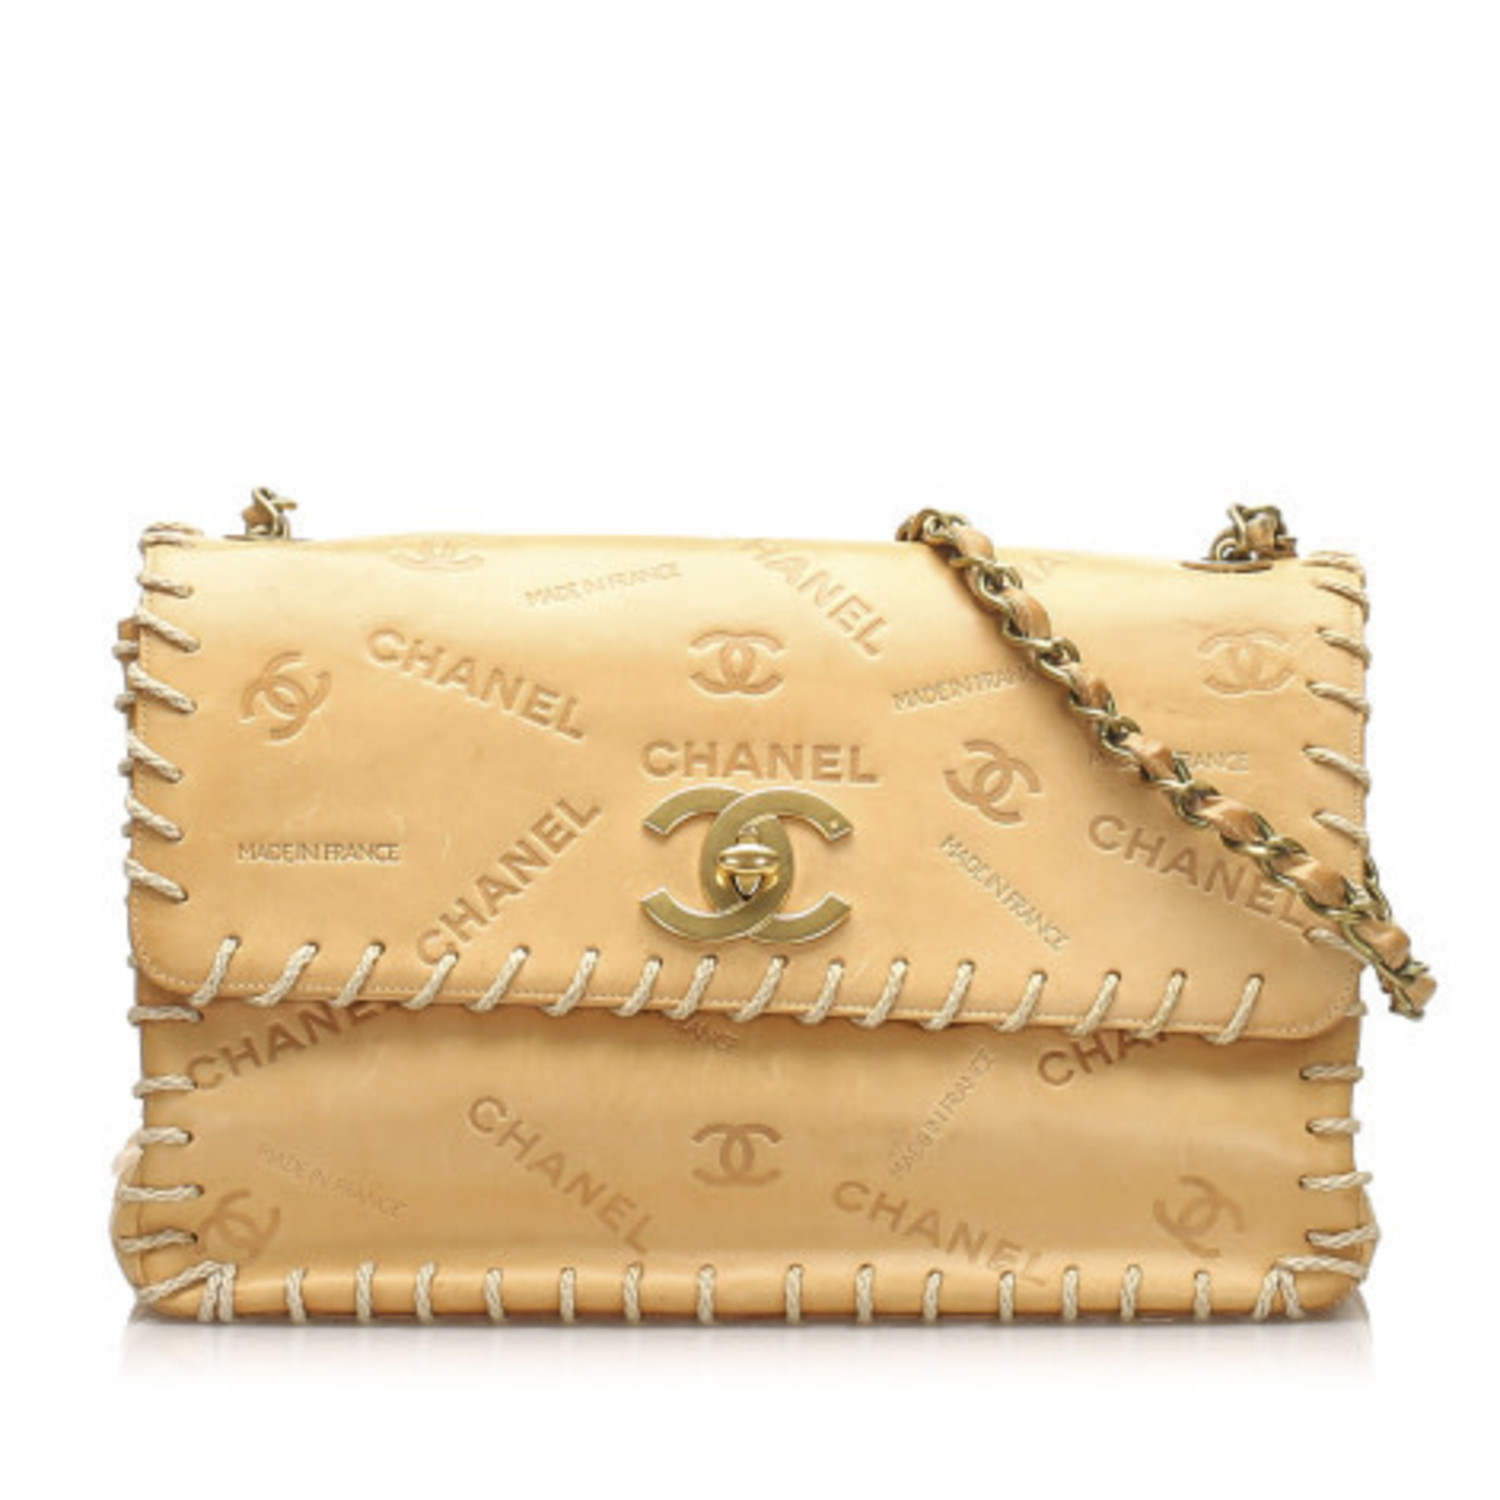 Chanel Turnlock Whipstitch Lambskin Leather Shoulder Bag  Marmalade